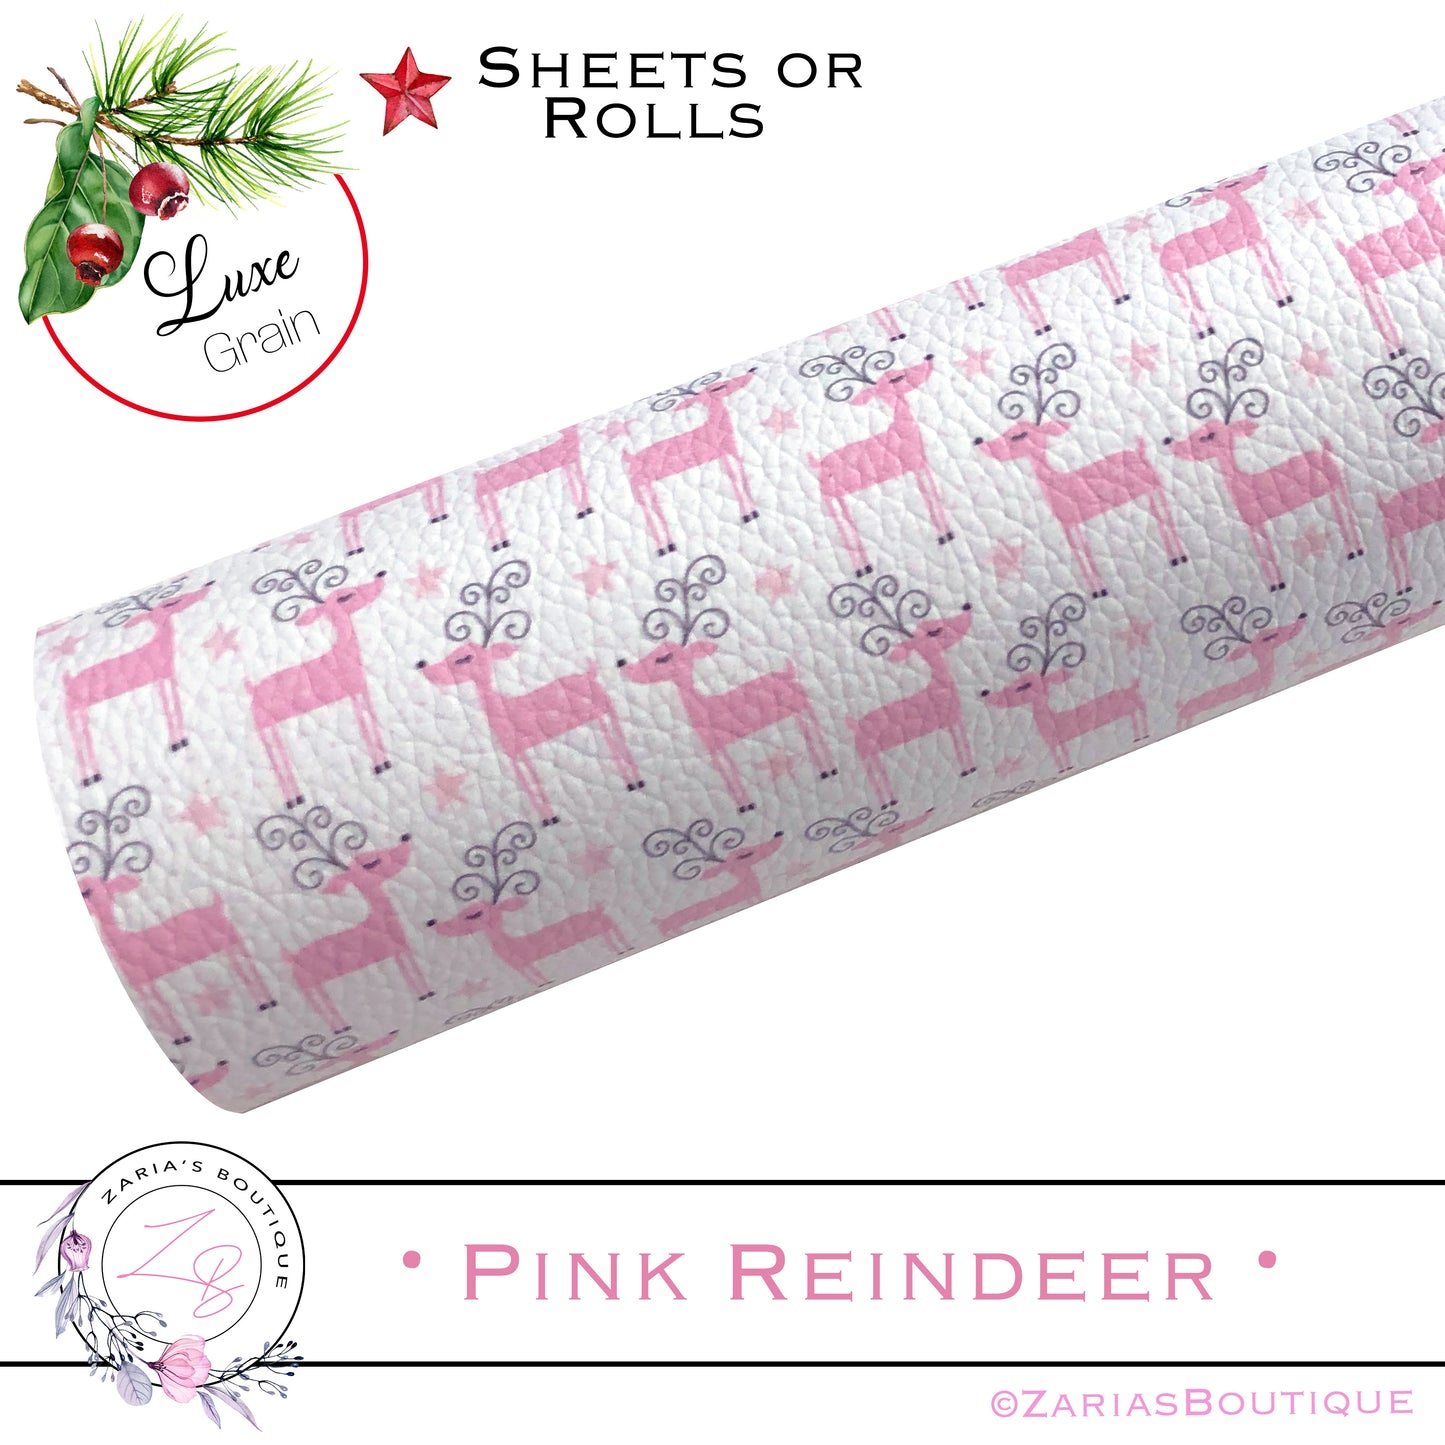 ⋅ Pretty In Pink Christmas  ⋅ Luxe Vegan Faux Leather ⋅ Sheets or Rolls! ⋅